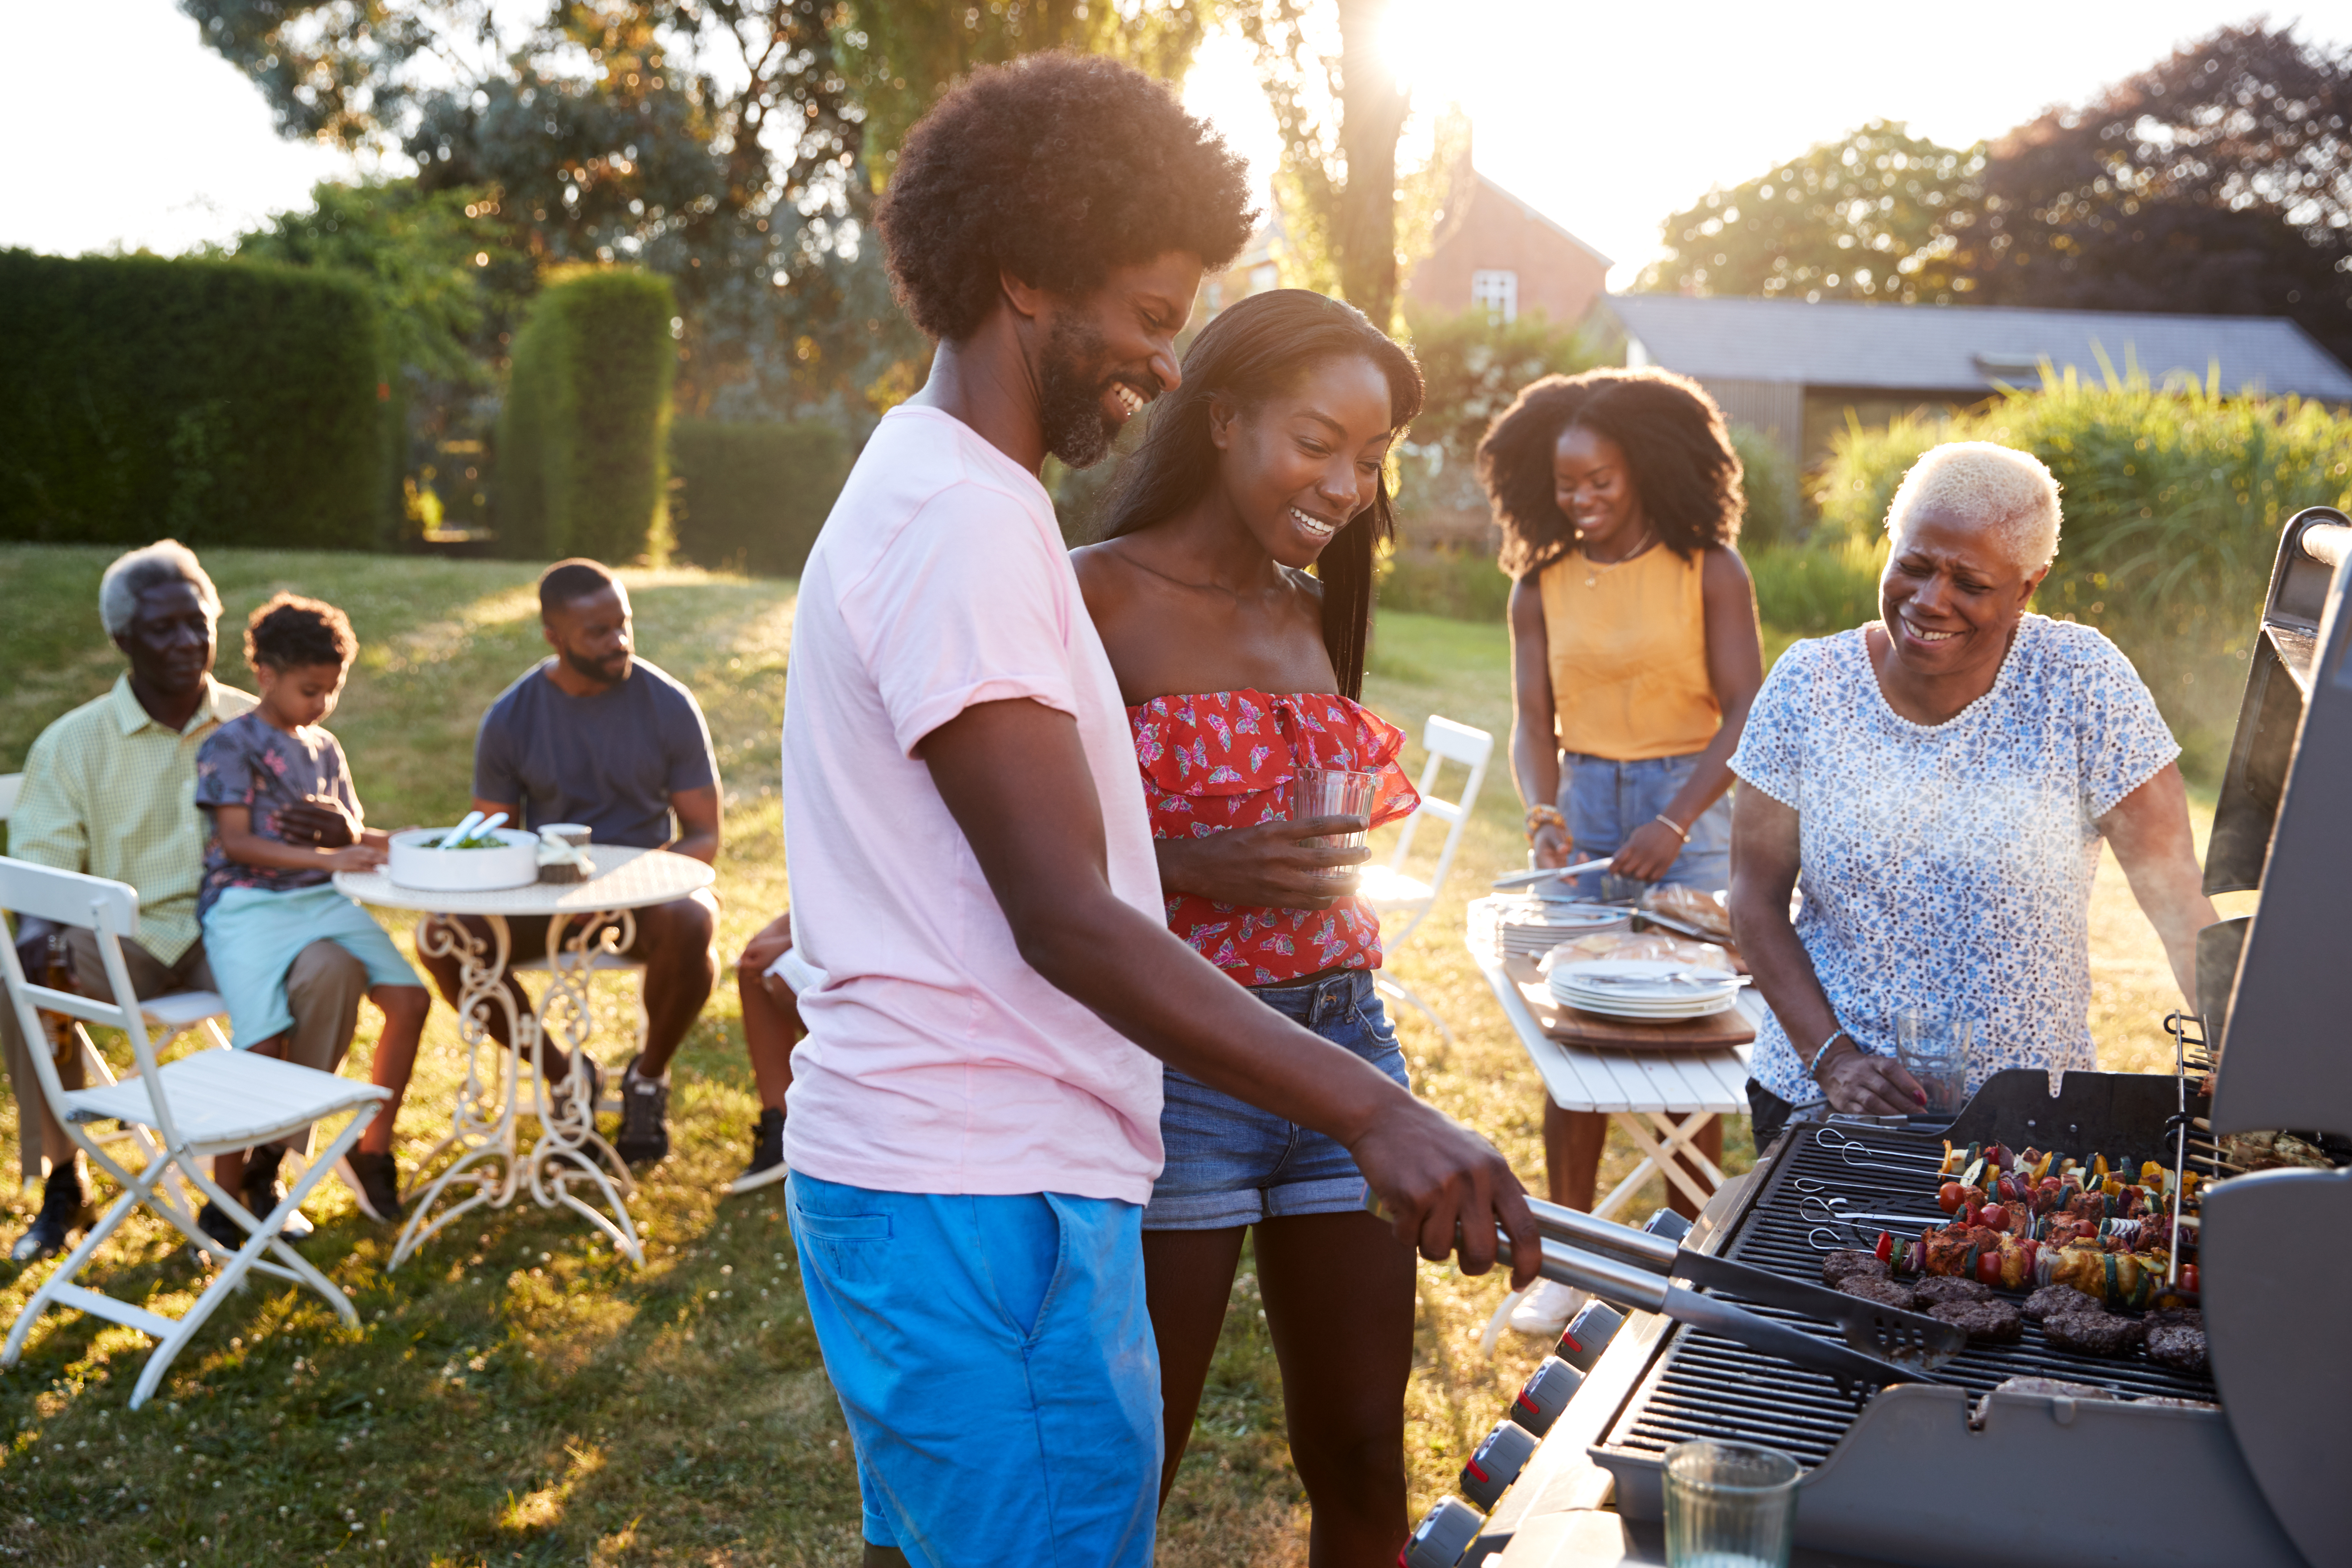 Group of people gathered outside around a grill